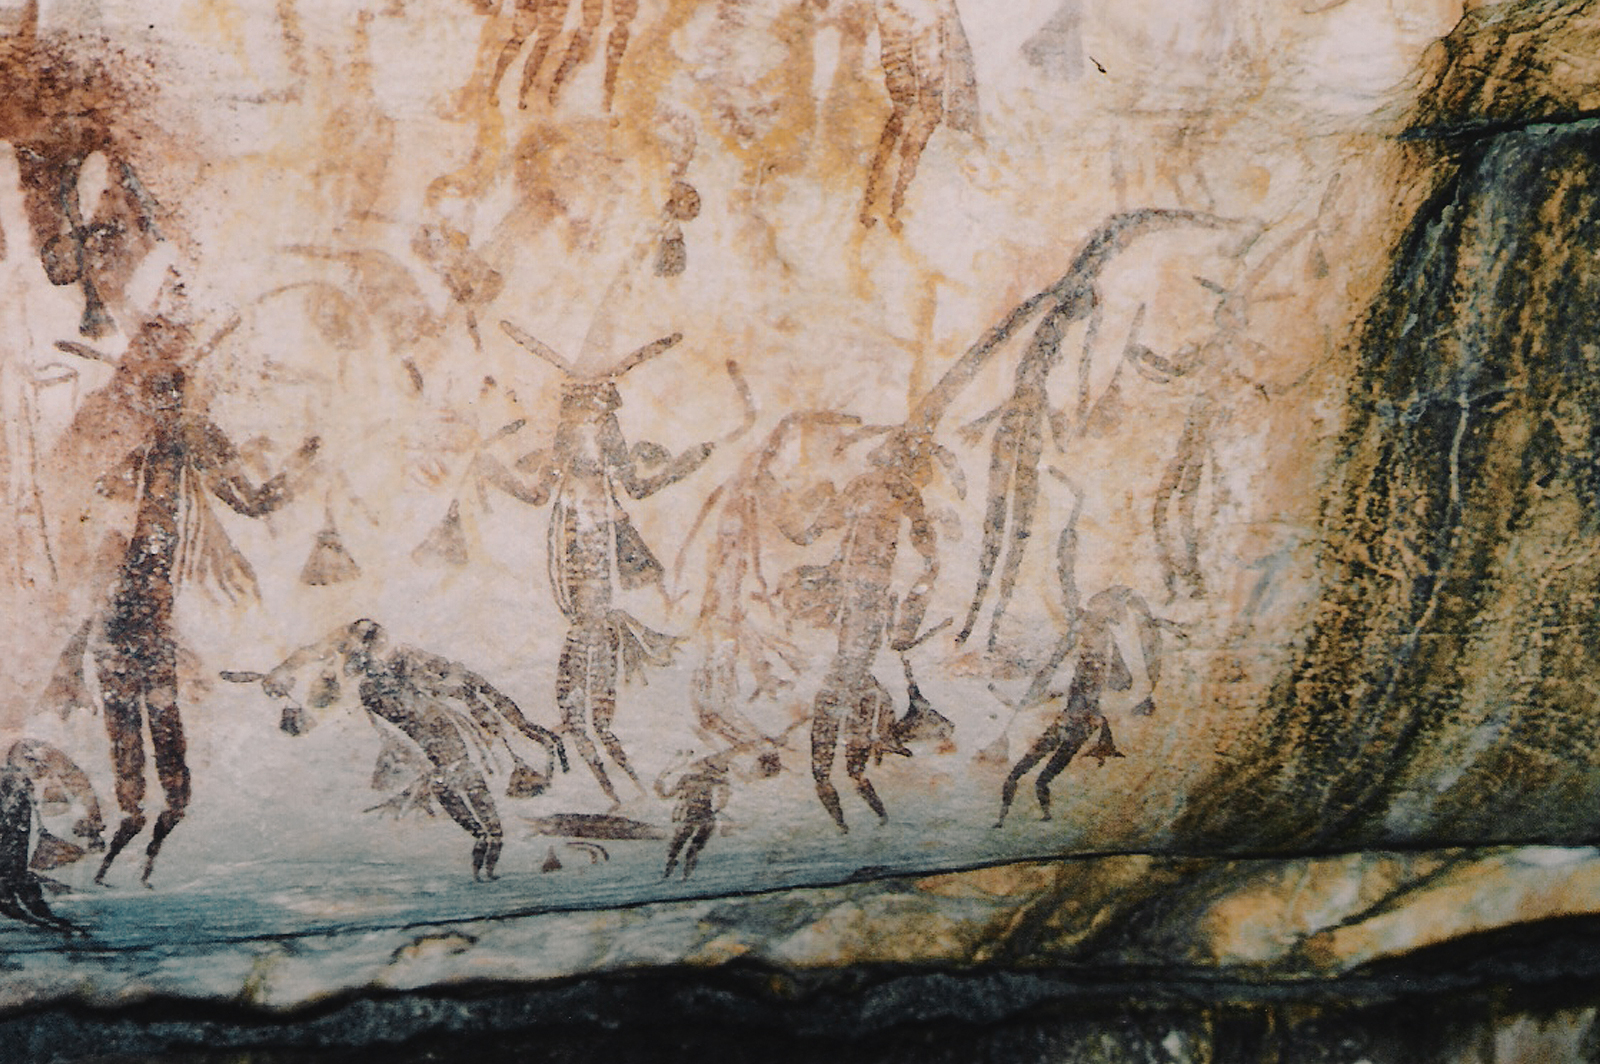 Gwion motif rock art from the Kimberley